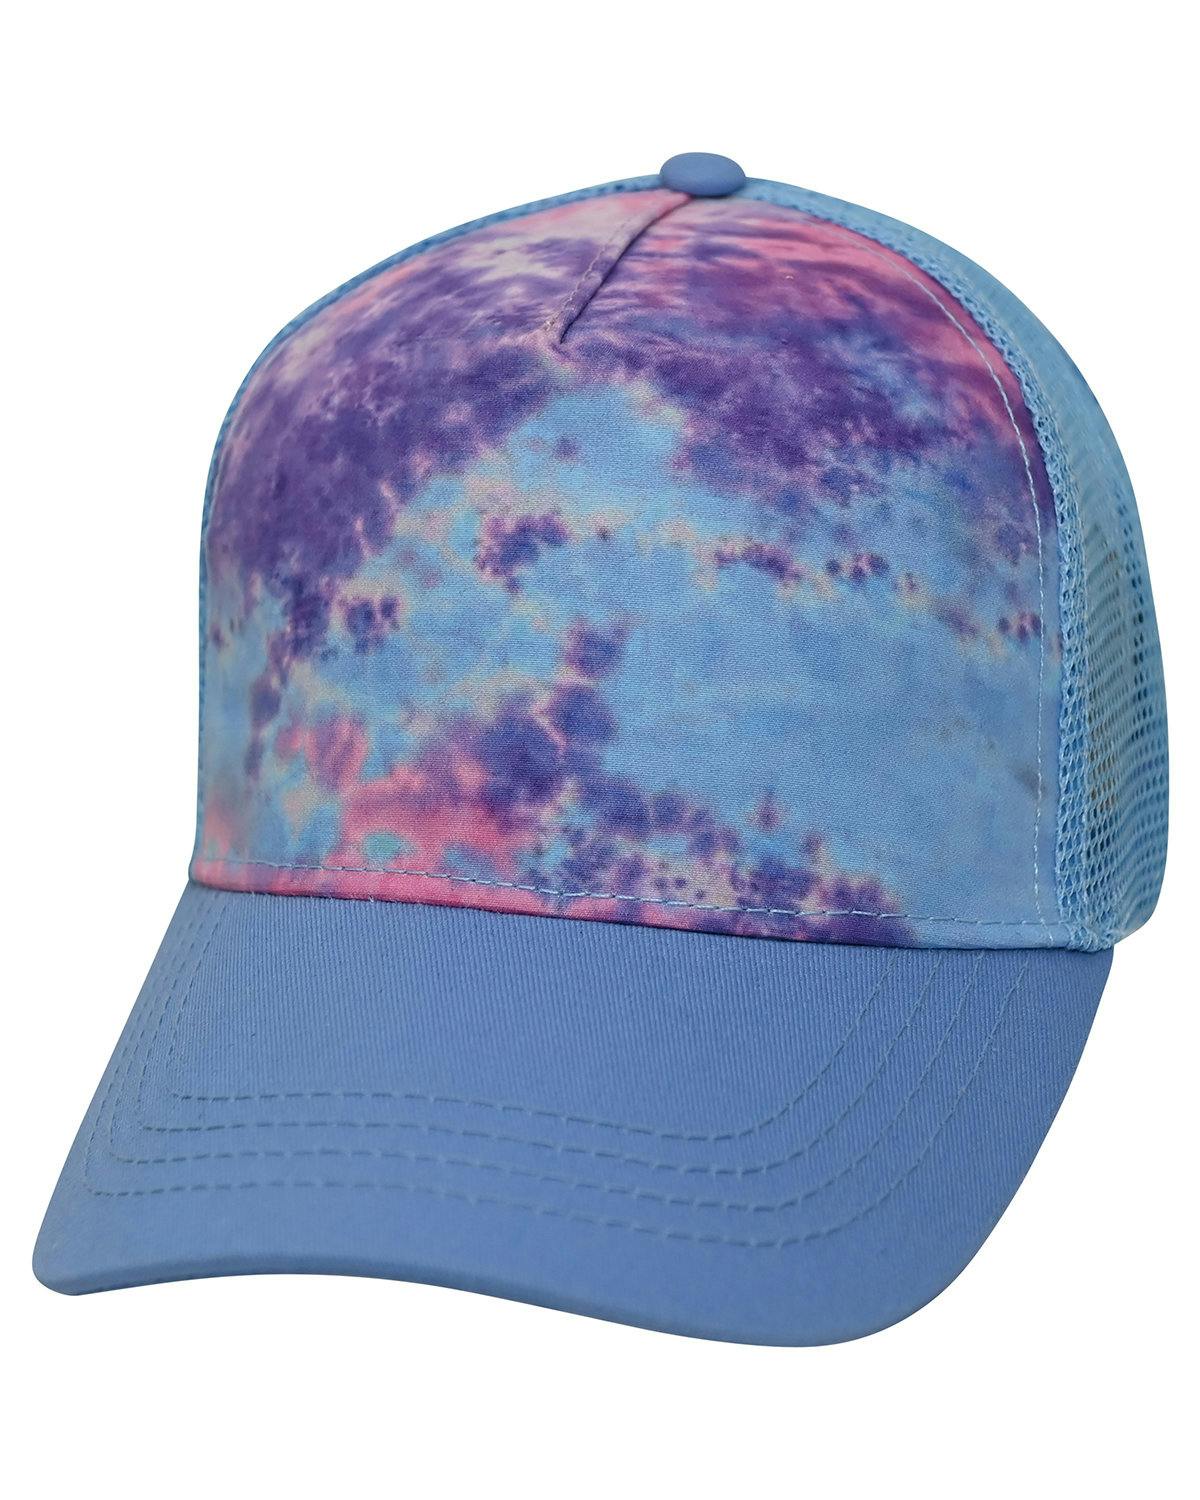 Image for Adult Trucker Hat